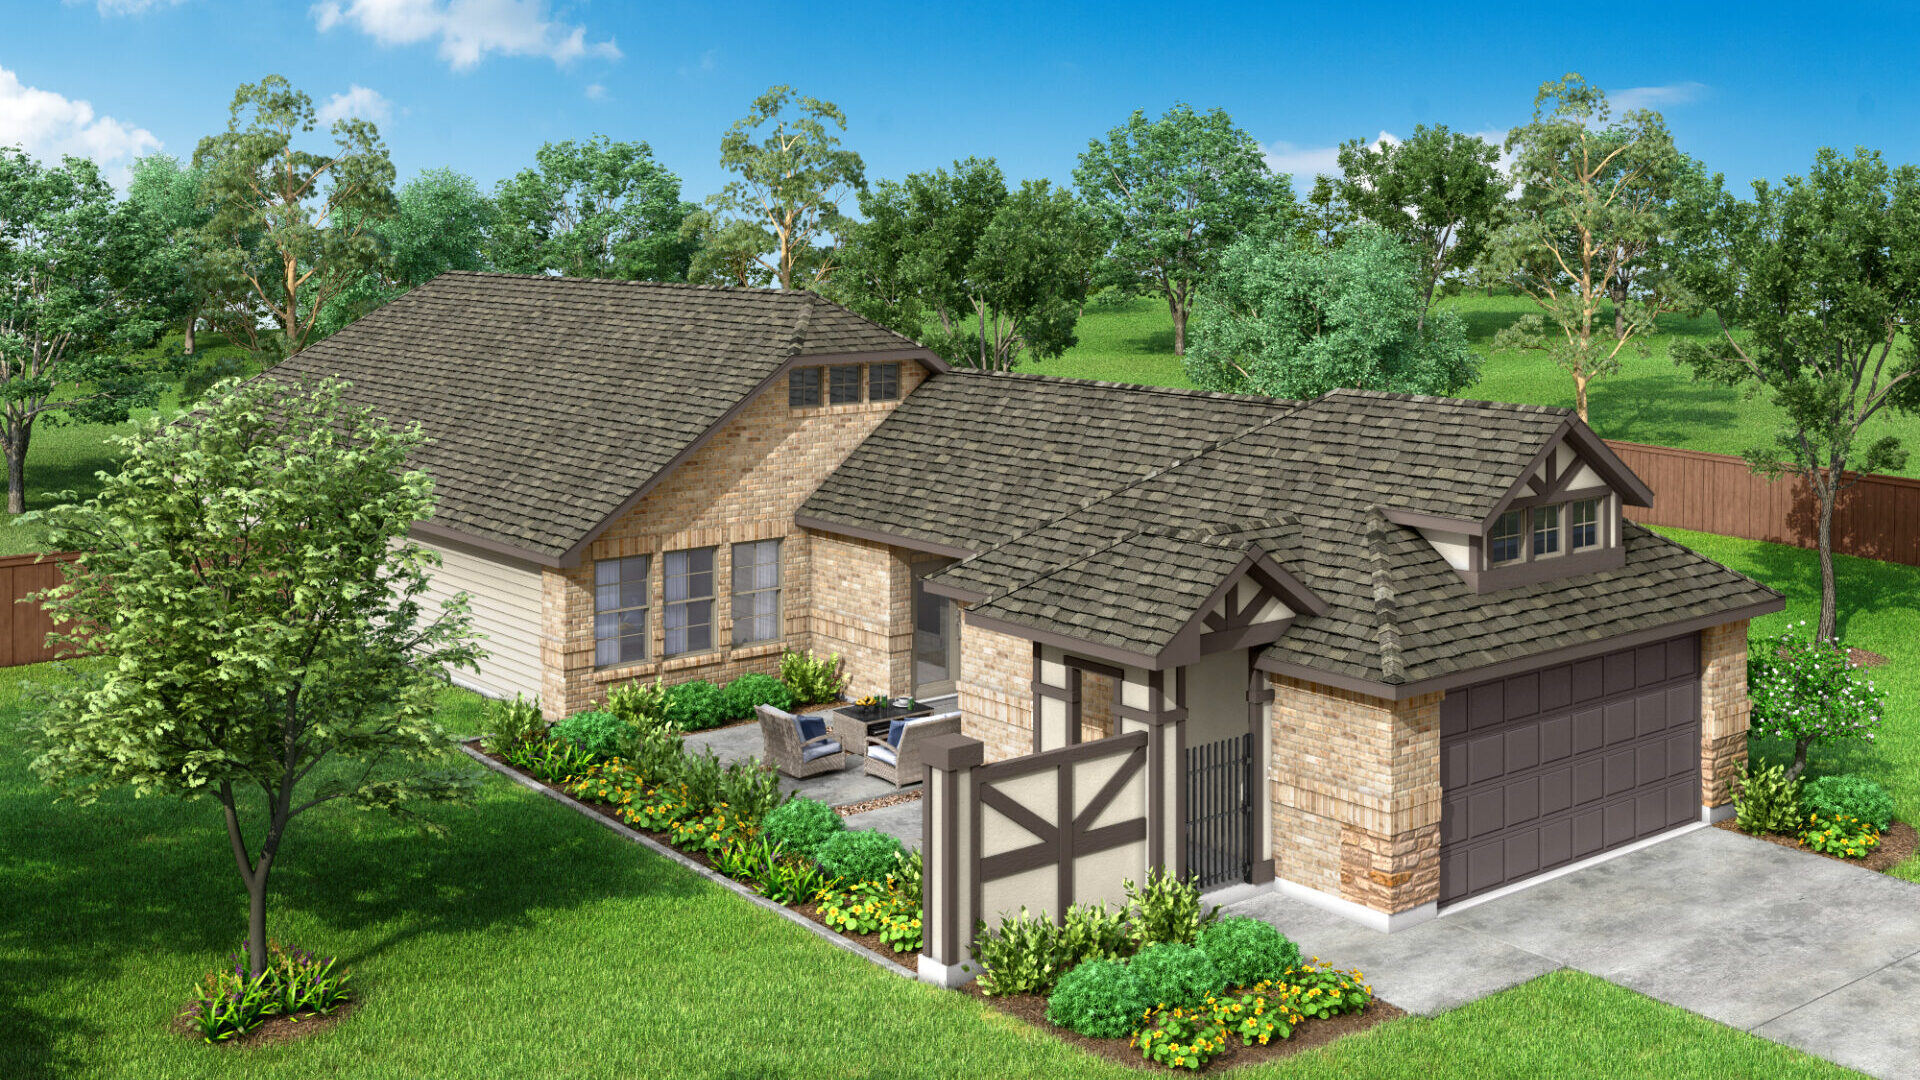  Elevon South - Coming Soon! New Homes in Lavon